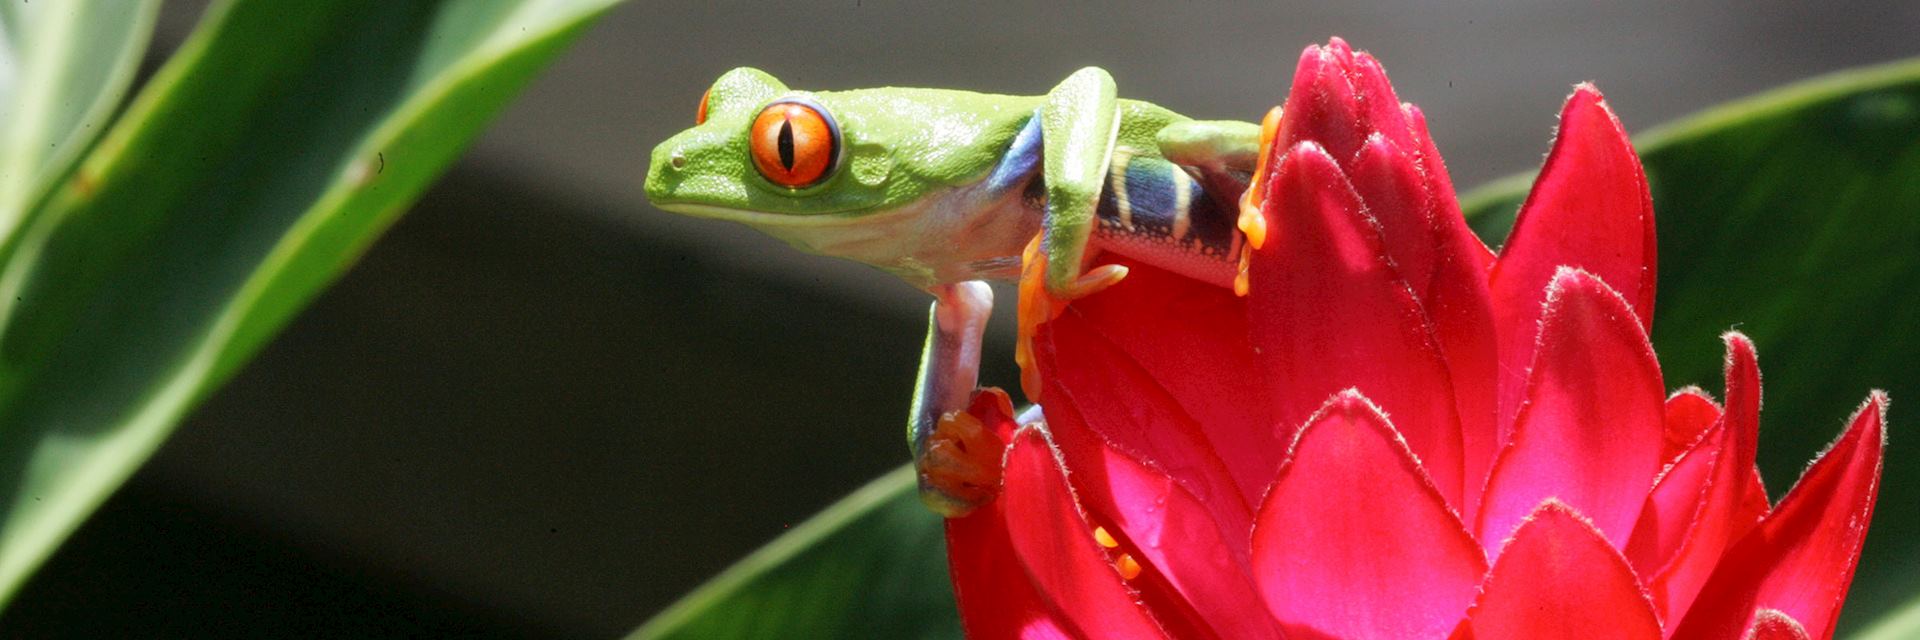 Red-eyed tree frog, Costa Rica